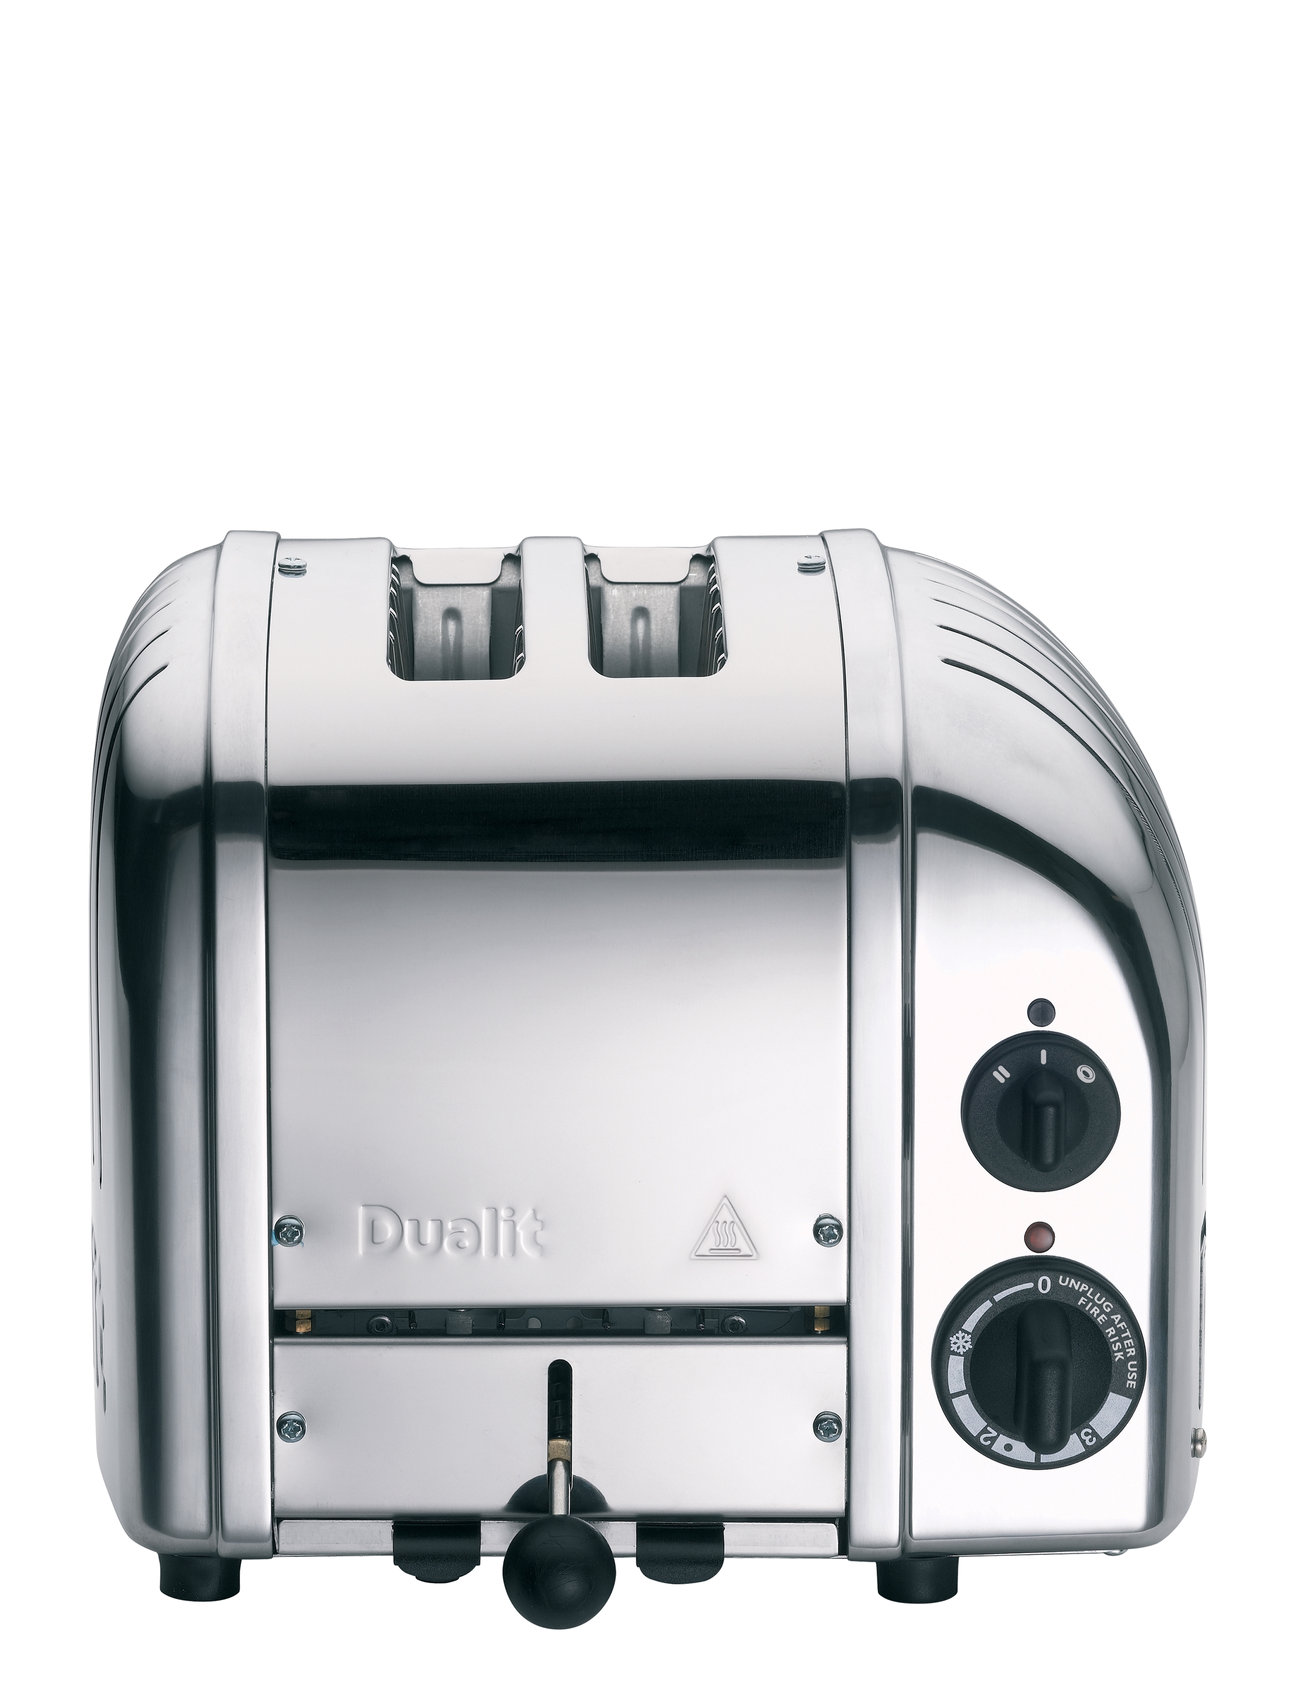 Dualit "Classic Toaster Home Kitchen Appliances Toasters Silver Dualit"